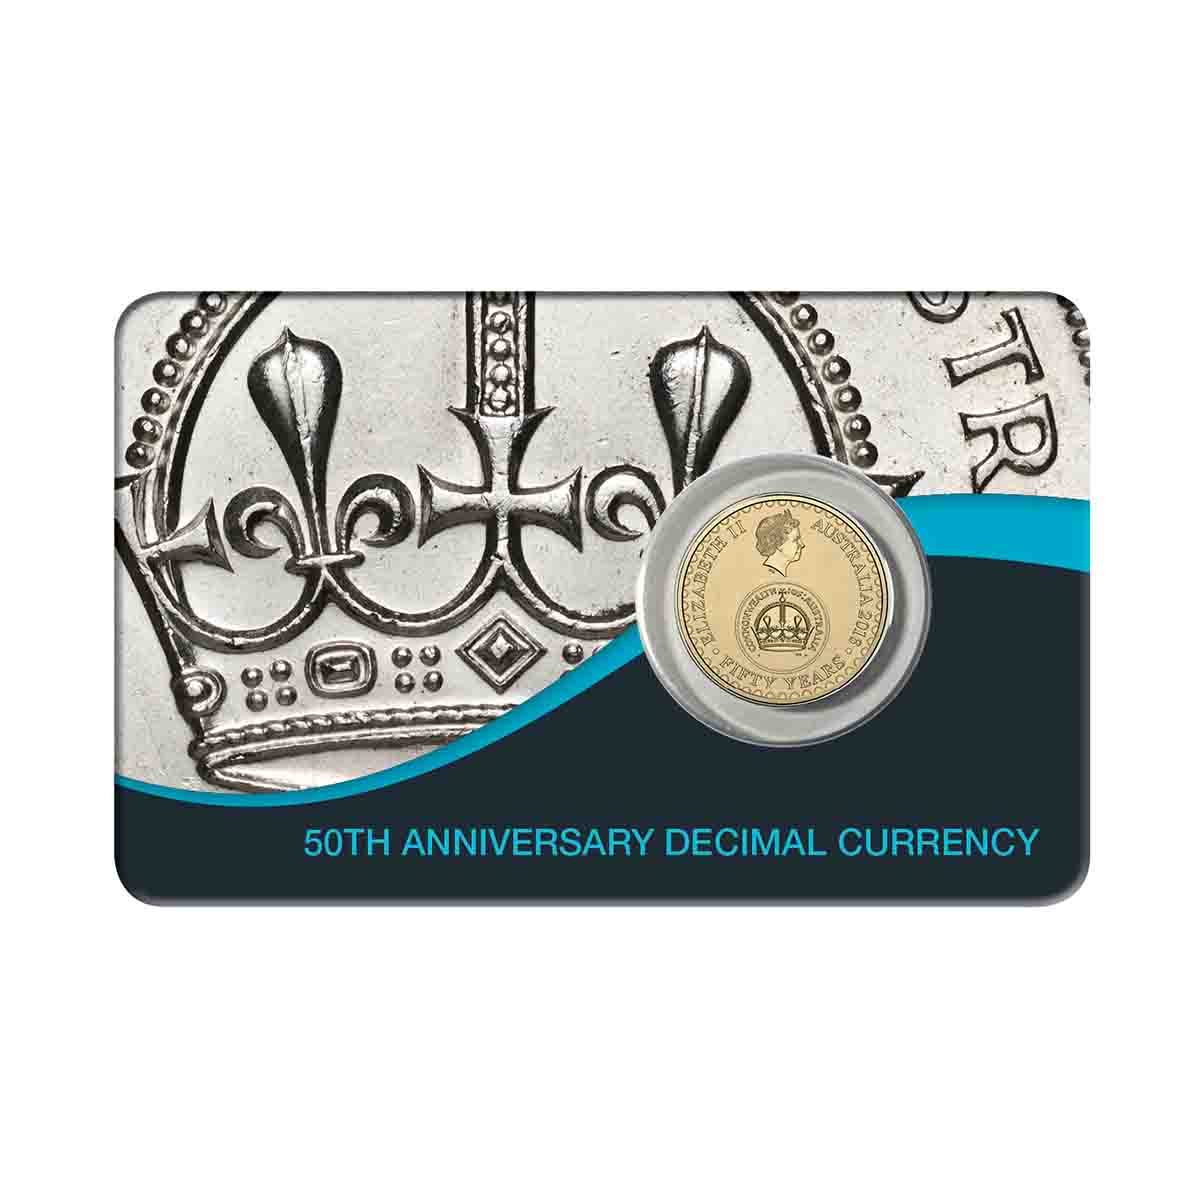 Decimal Currency 50th Anniversary 2016 $2 Al-Br Coin Pack